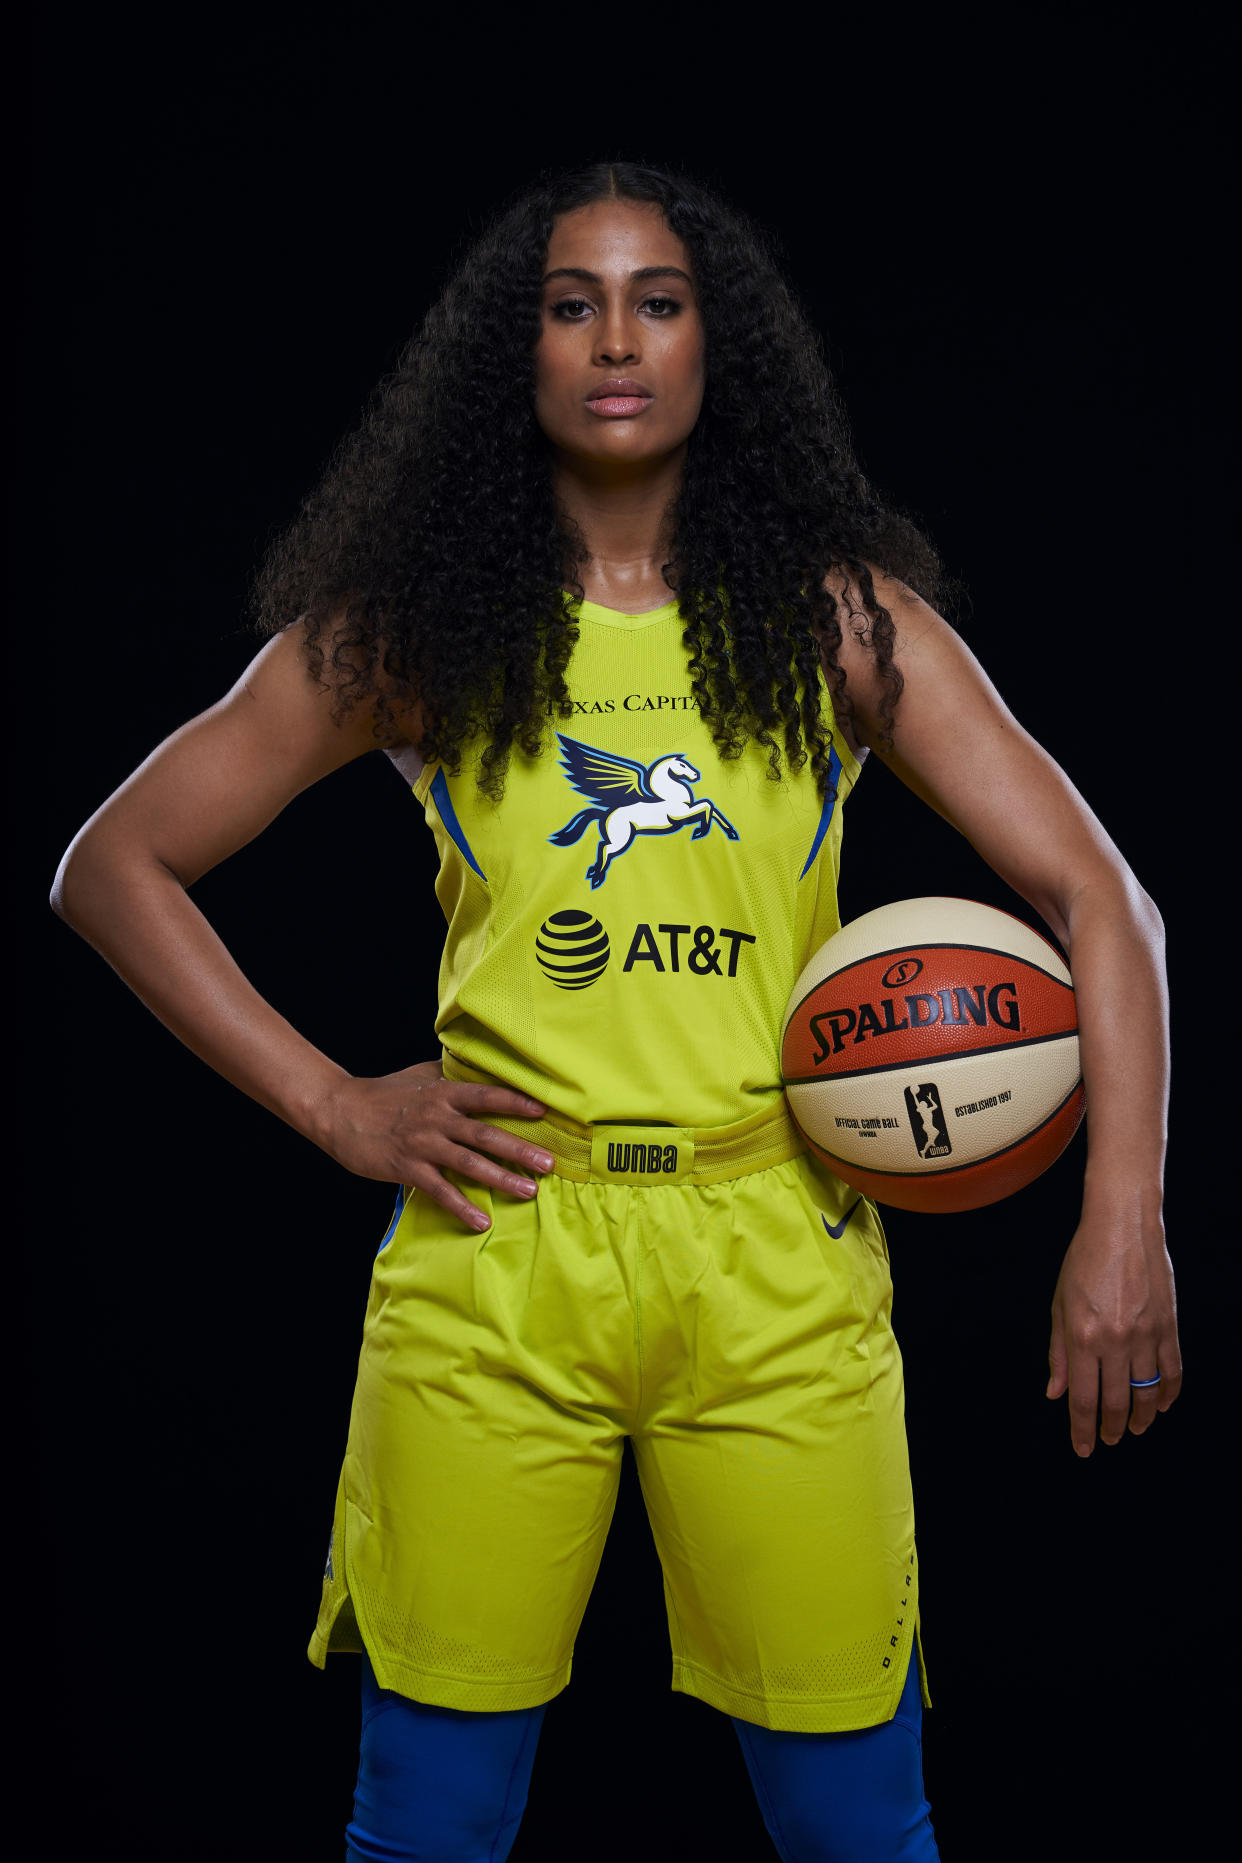 Skylar Diggins-Smith poses in May for a Dallas Wings player photo. She never played for the team this season after taking two months off for postpartum depression. (Photo: Cooper Neill via Getty Images)